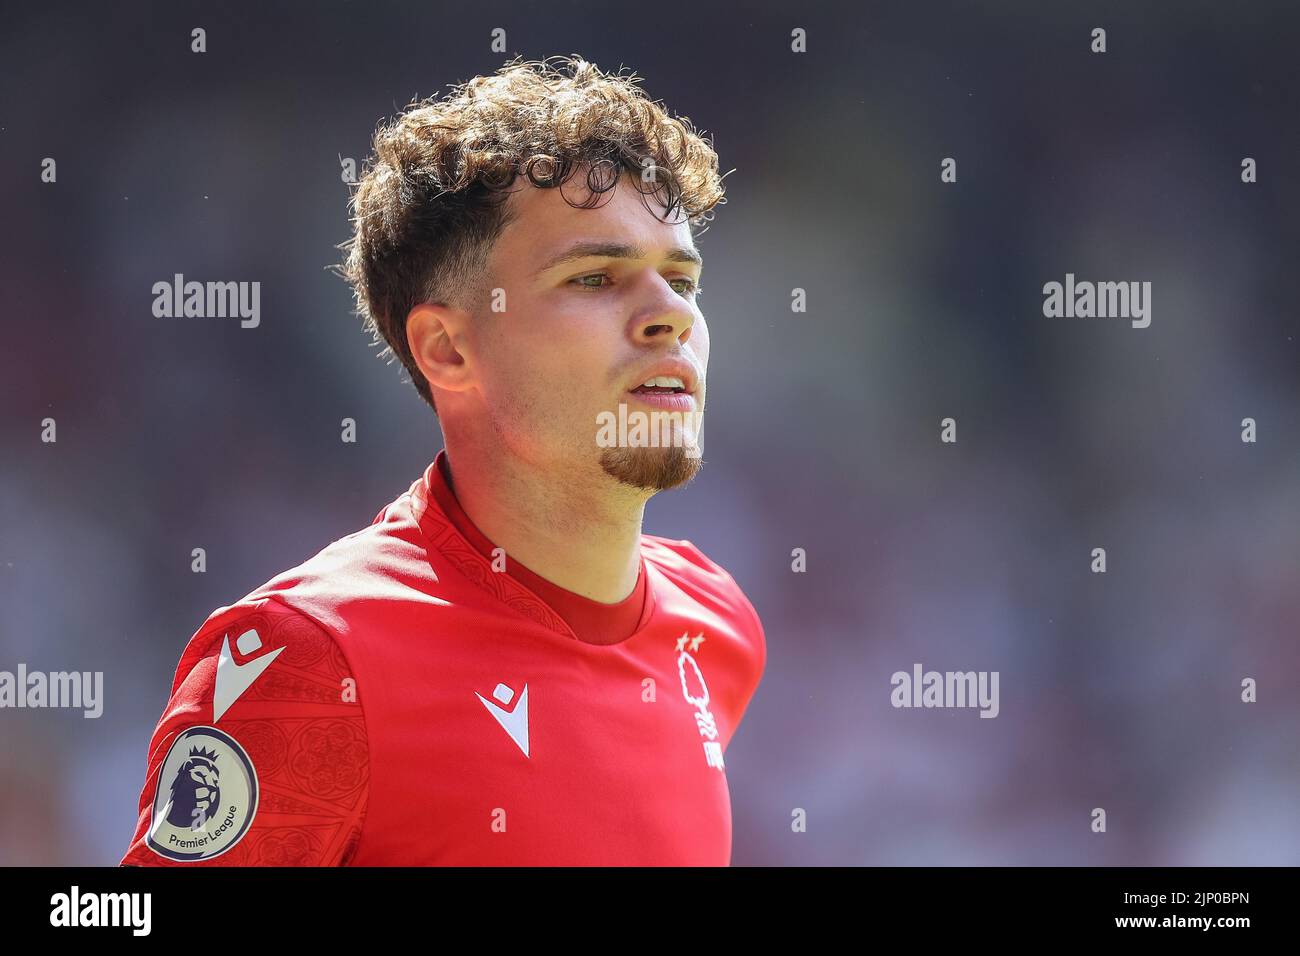 Neco Williams #7 of Nottingham Forest during the game Stock Photo